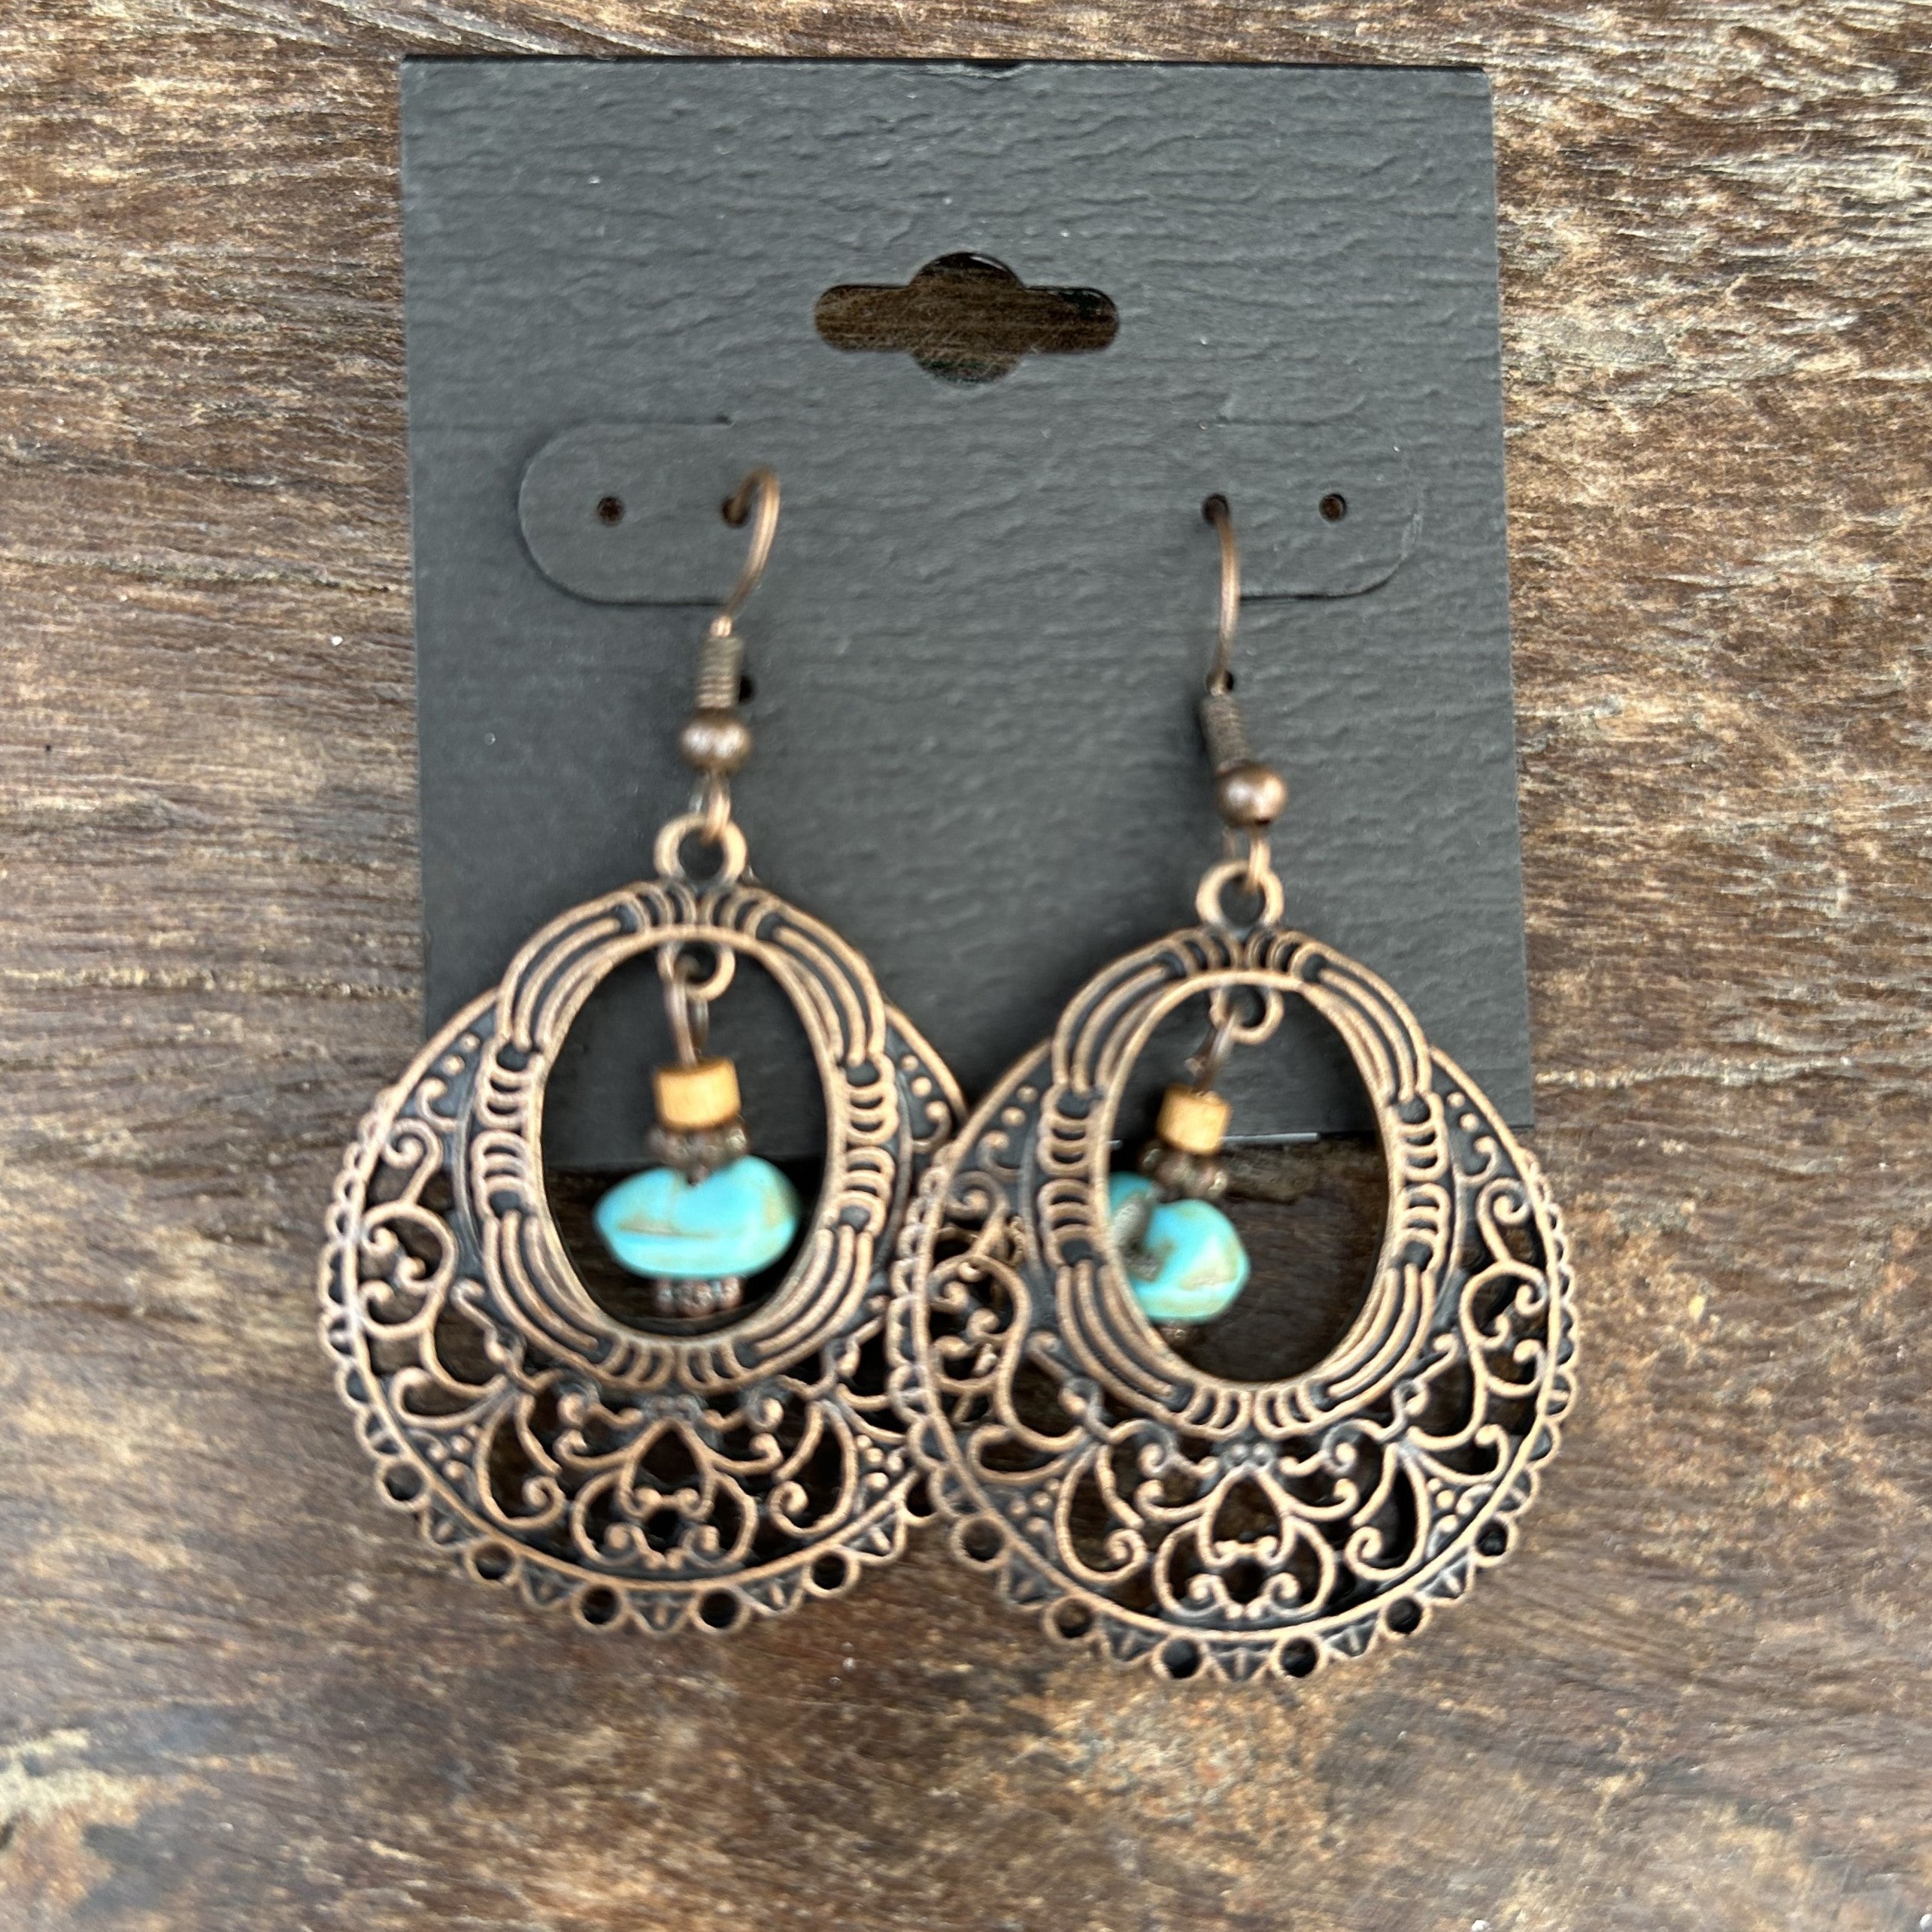 Add a touch of elegance to your outfit with these stunning Ornate Bronze Metal Round Earrings! The beautiful round design and stylish center turquoise stone make these earrings a beautiful combination. The ornate bronze color adds a touch of sophistication to any look.